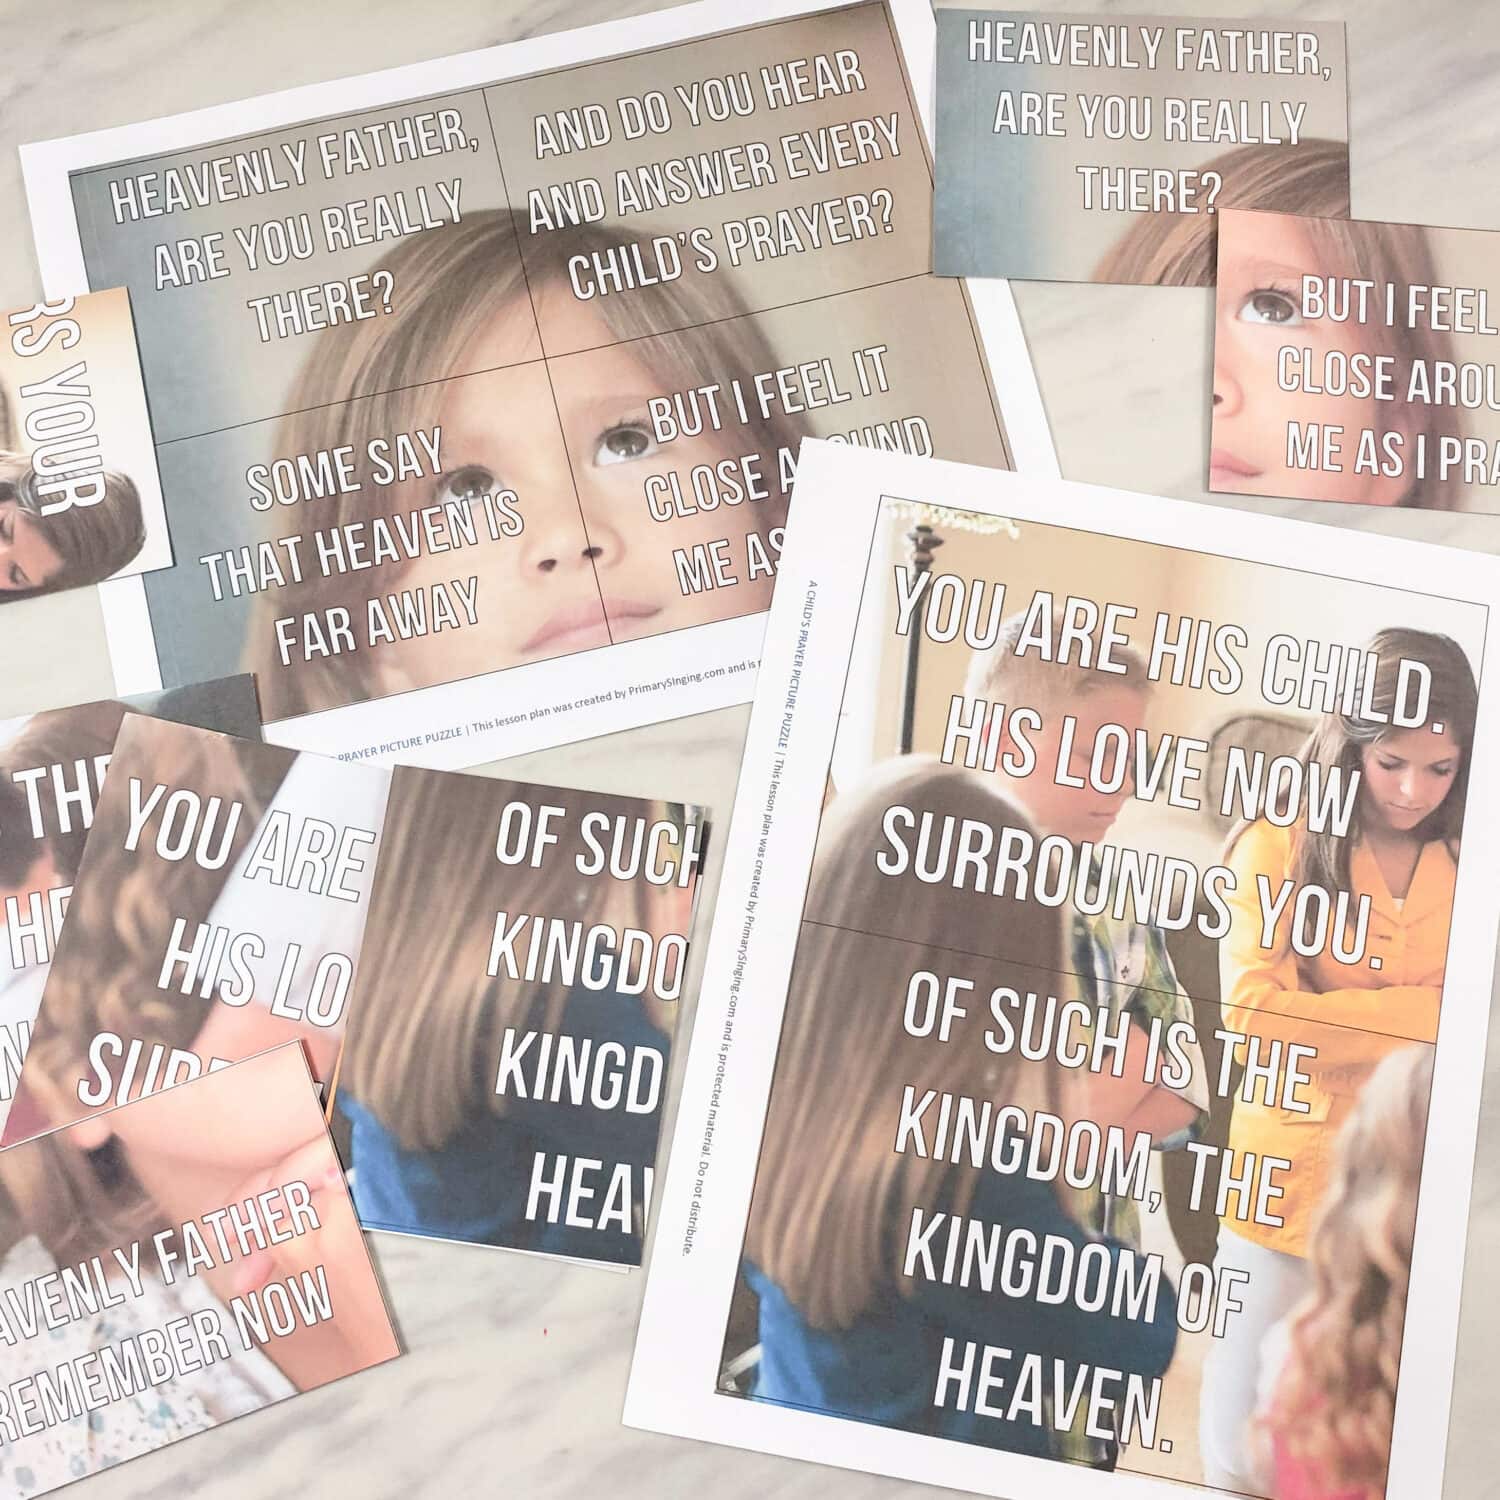 A Child's Prayer picture puzzle printable fun singing time idea for LDS Primary music leaders. You'll cut out the picture with lyrics and can combine them to a double sided poster that flips over to reveal the 2nd verse! 